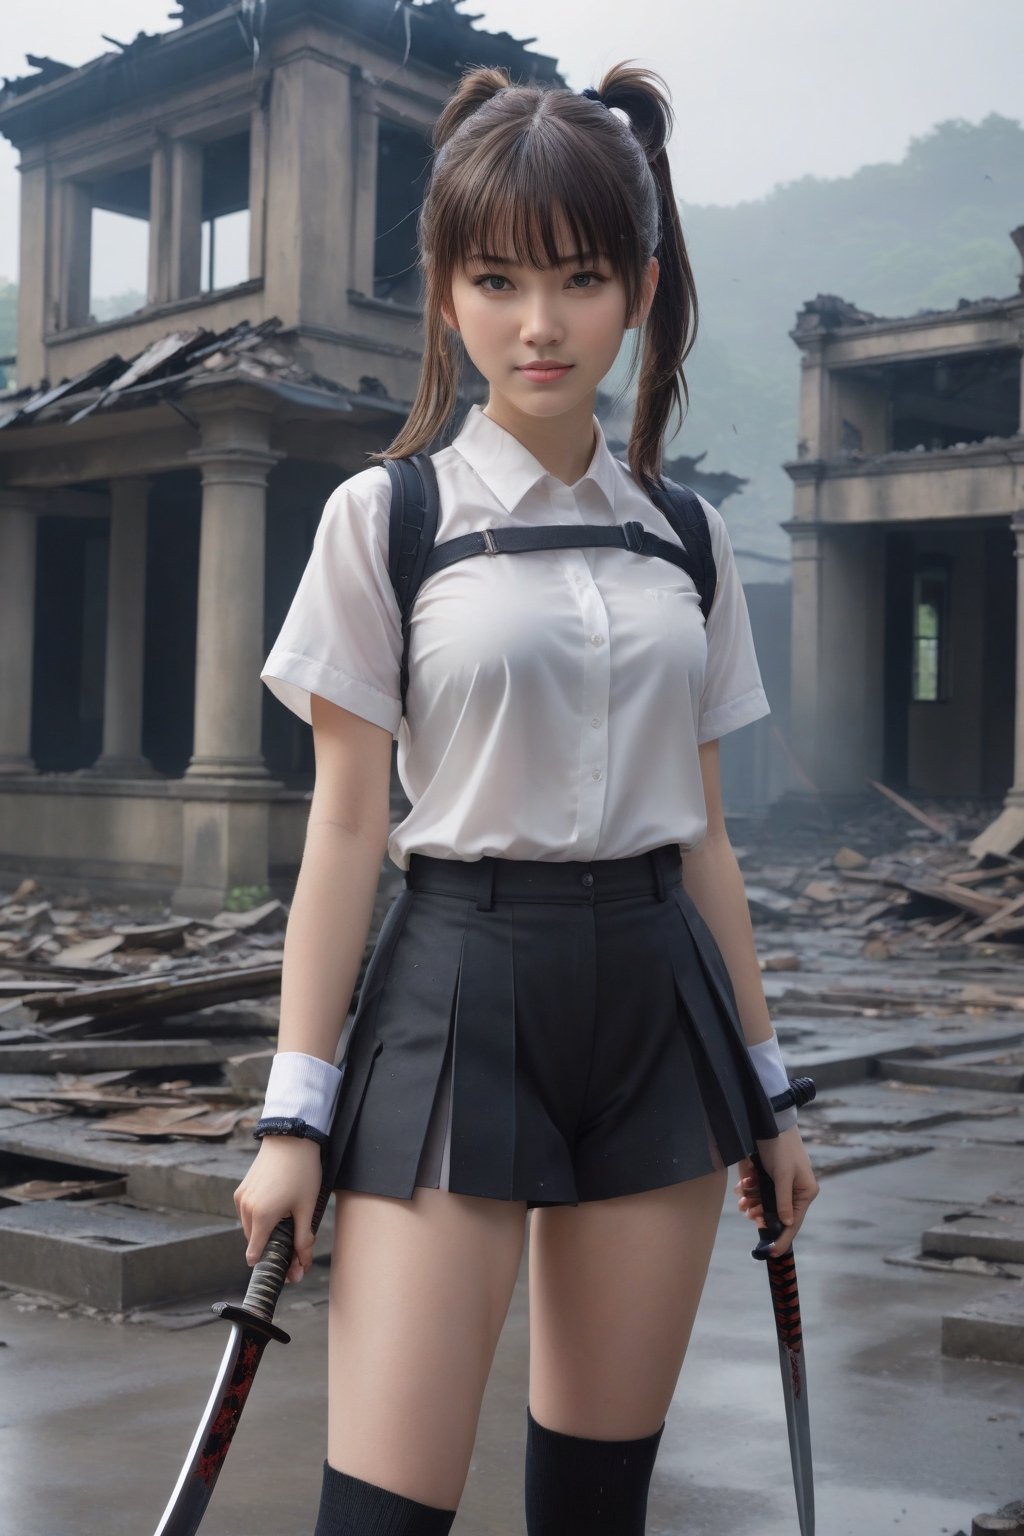 A masterpiece of photorealistic art! A young girl, dressed in a serafuku and socks, stands confidently outdoors amidst the ruins of a destroyed school. Her long ponytail flows down her back, framing her striking features. She wears a white blouse with black trousers and holds a katana at her side, its sheath partially opened. The sword glows softly in the rain-soaked atmosphere. Her bangs fall across her forehead as she looks directly at the viewer with a closed-mouth smile. The composition is enhanced by depth of field, drawing attention to her determined stance. The complex background features the destroyed school's remnants, blending seamlessly into the rainy scene.